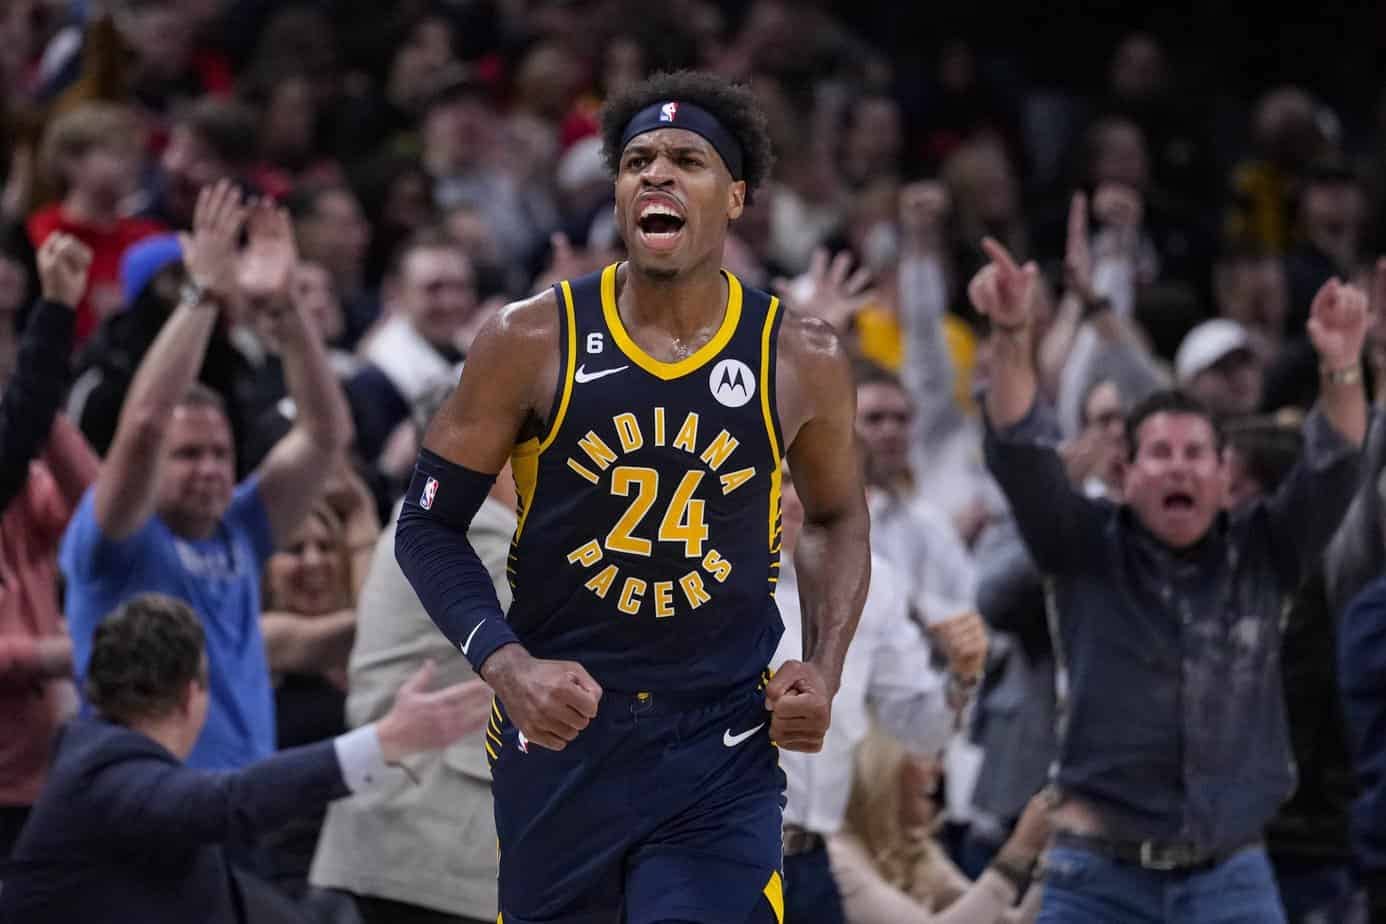 The NBA All-Star Break has arrived. Is Buddy Hield among the best betting options for the NBA's 3-point contest? Our expert has an angle...